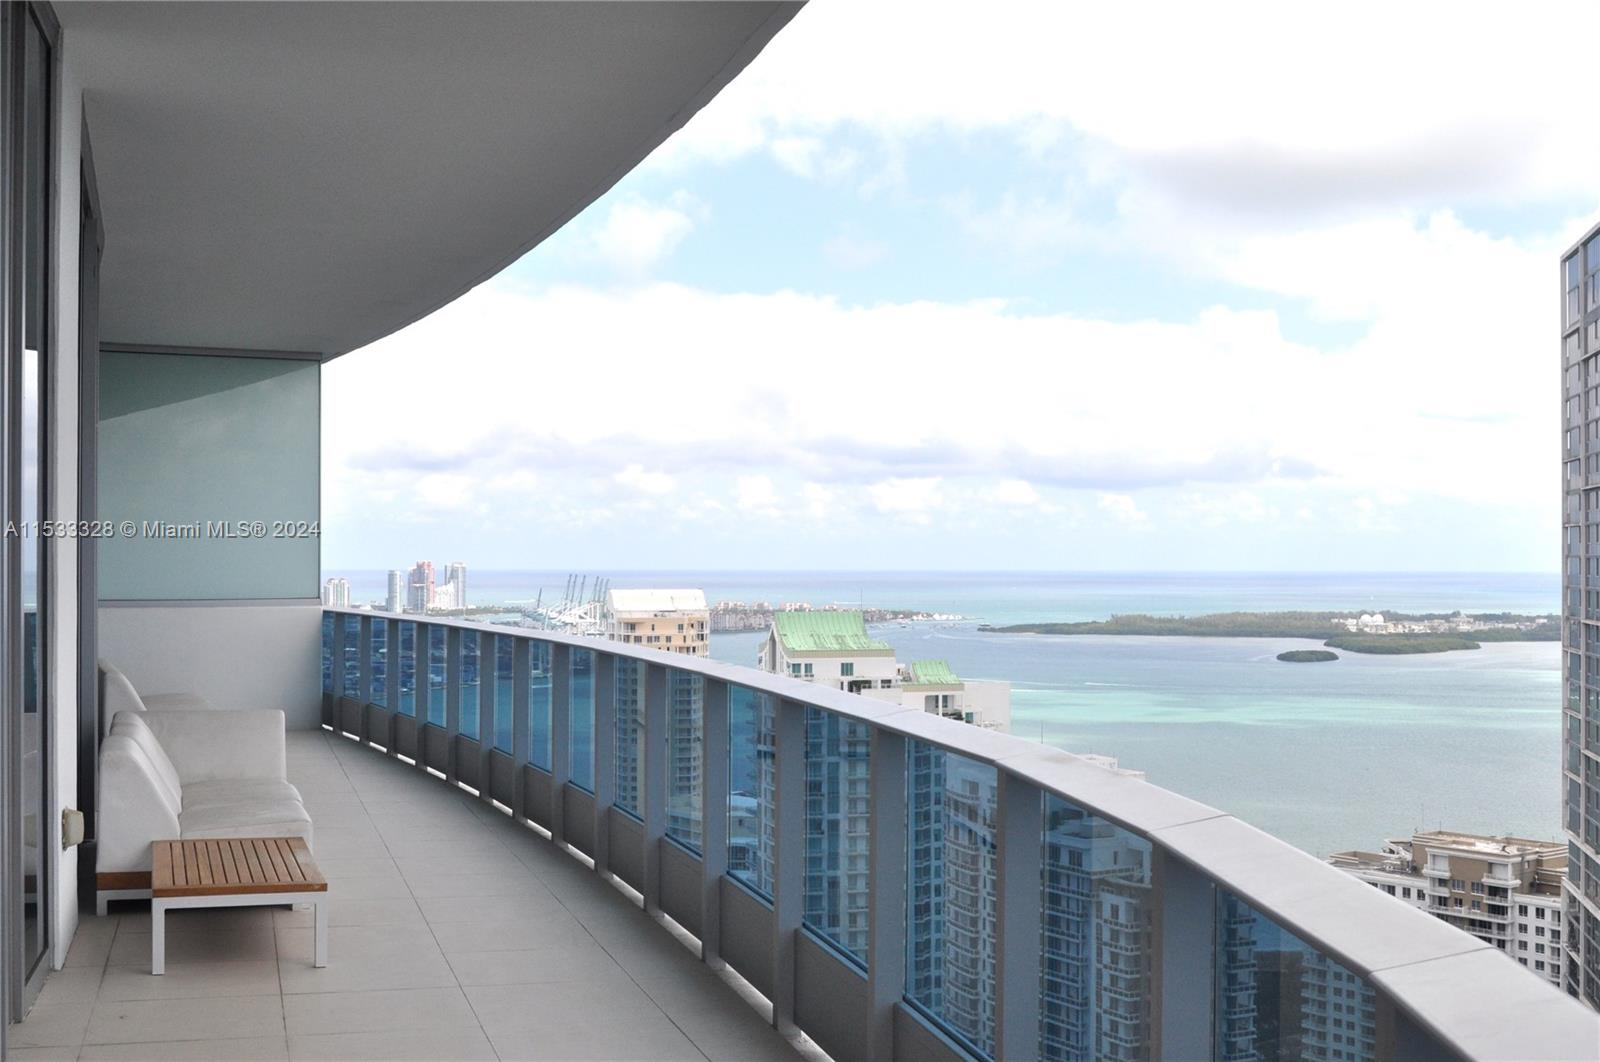 Stunning contemporary lower penthouse unit with soaring high ceilings, nestled in the heart of Brickell, Miami's vibrant epicenter. This 3-bed, 3.5-bath gem offers spacious living areas flooded with natural light, complemented by sleek finishes and high-end fixtures. Enjoy breathtaking skyline views from the expansive balcony. The master suite boasts a luxurious spa-like bath and ample closet space. Residents indulge in world-class amenities, including pool, fitness center, and more. Experience urban luxury living at its finest in this prime location.